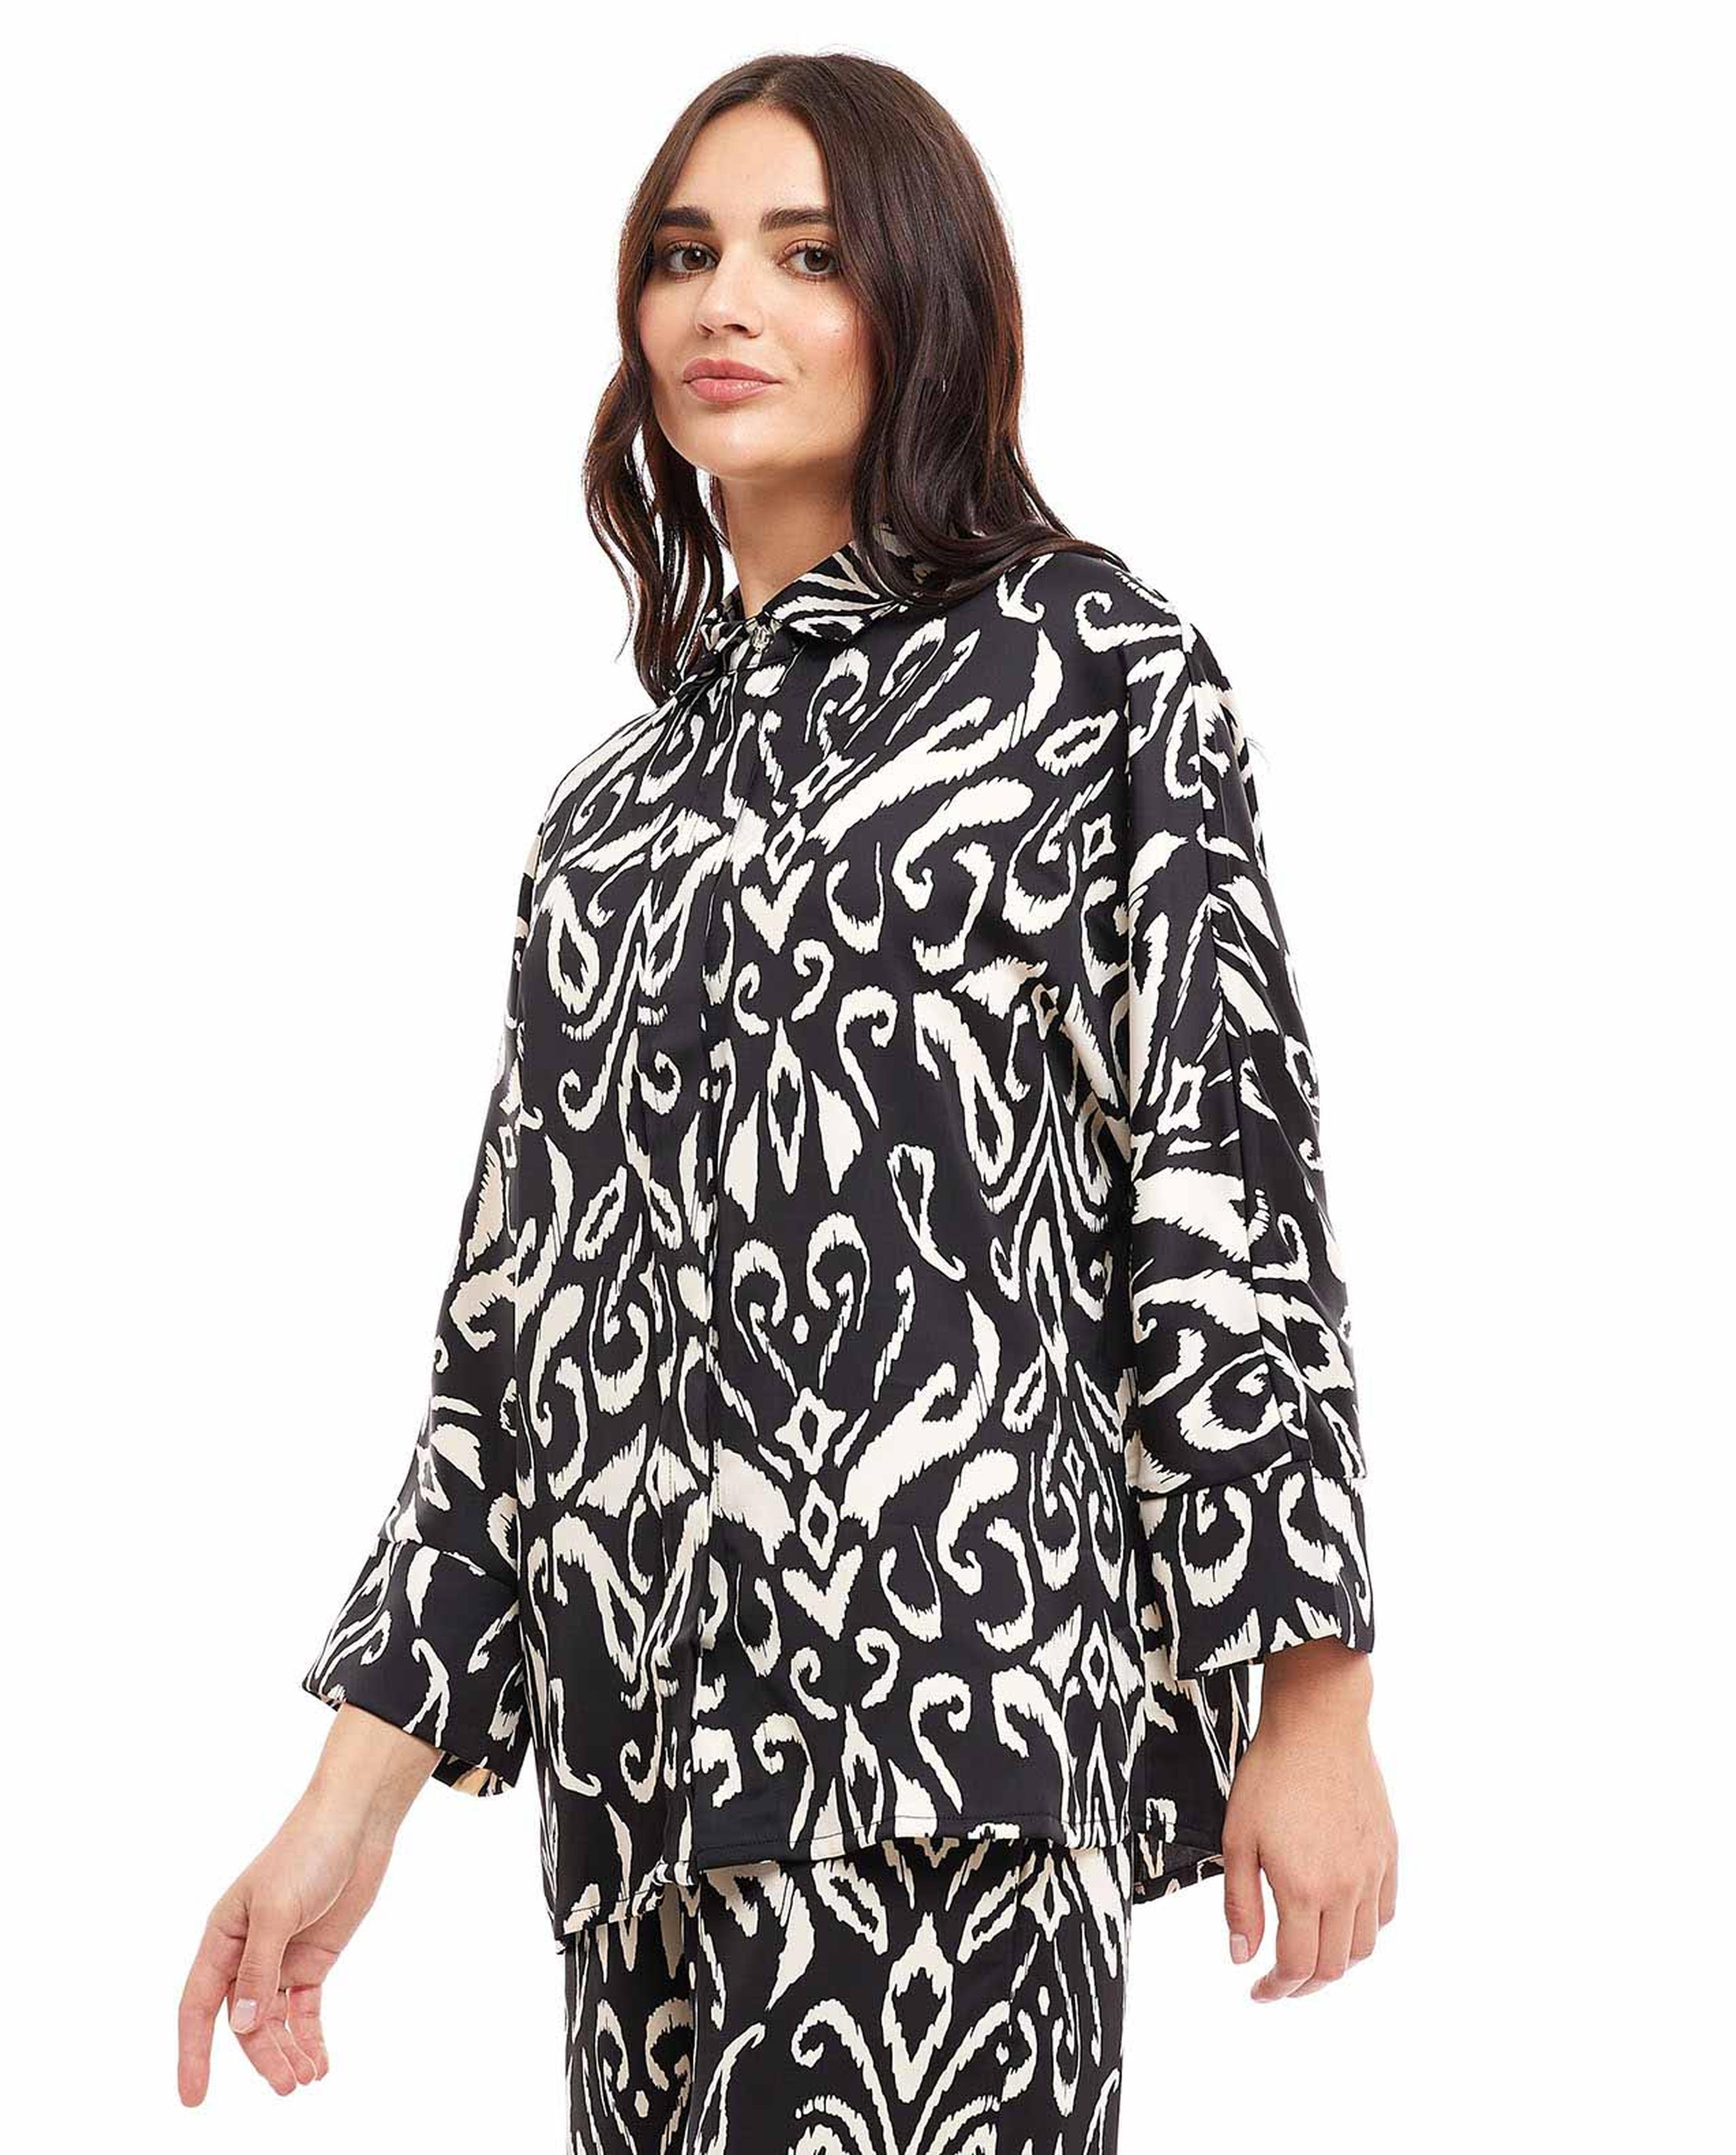 Patterned Tunic with Spread Collar and Long Sleeves